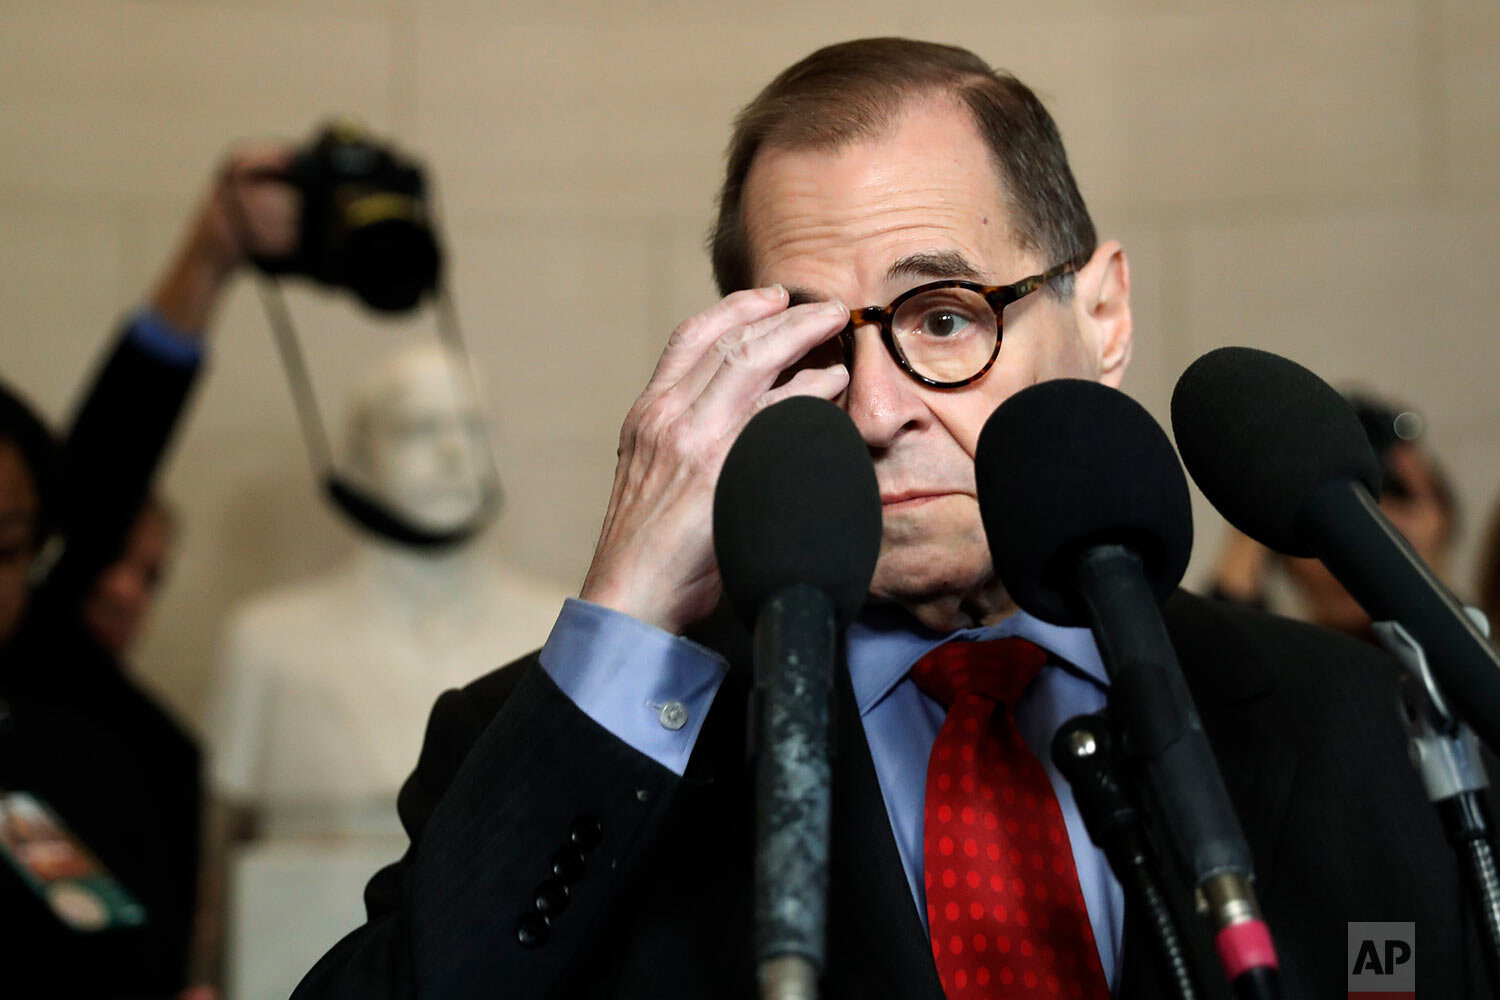  House Judiciary Committee Chairman Rep. Jerrold Nadler, D-N.Y., speaks to the media following a House Judiciary Committee vote on the articles of impeachment against President Donald Trump, Friday, Dec. 13, 2019, on Capitol Hill in Washington. (AP P